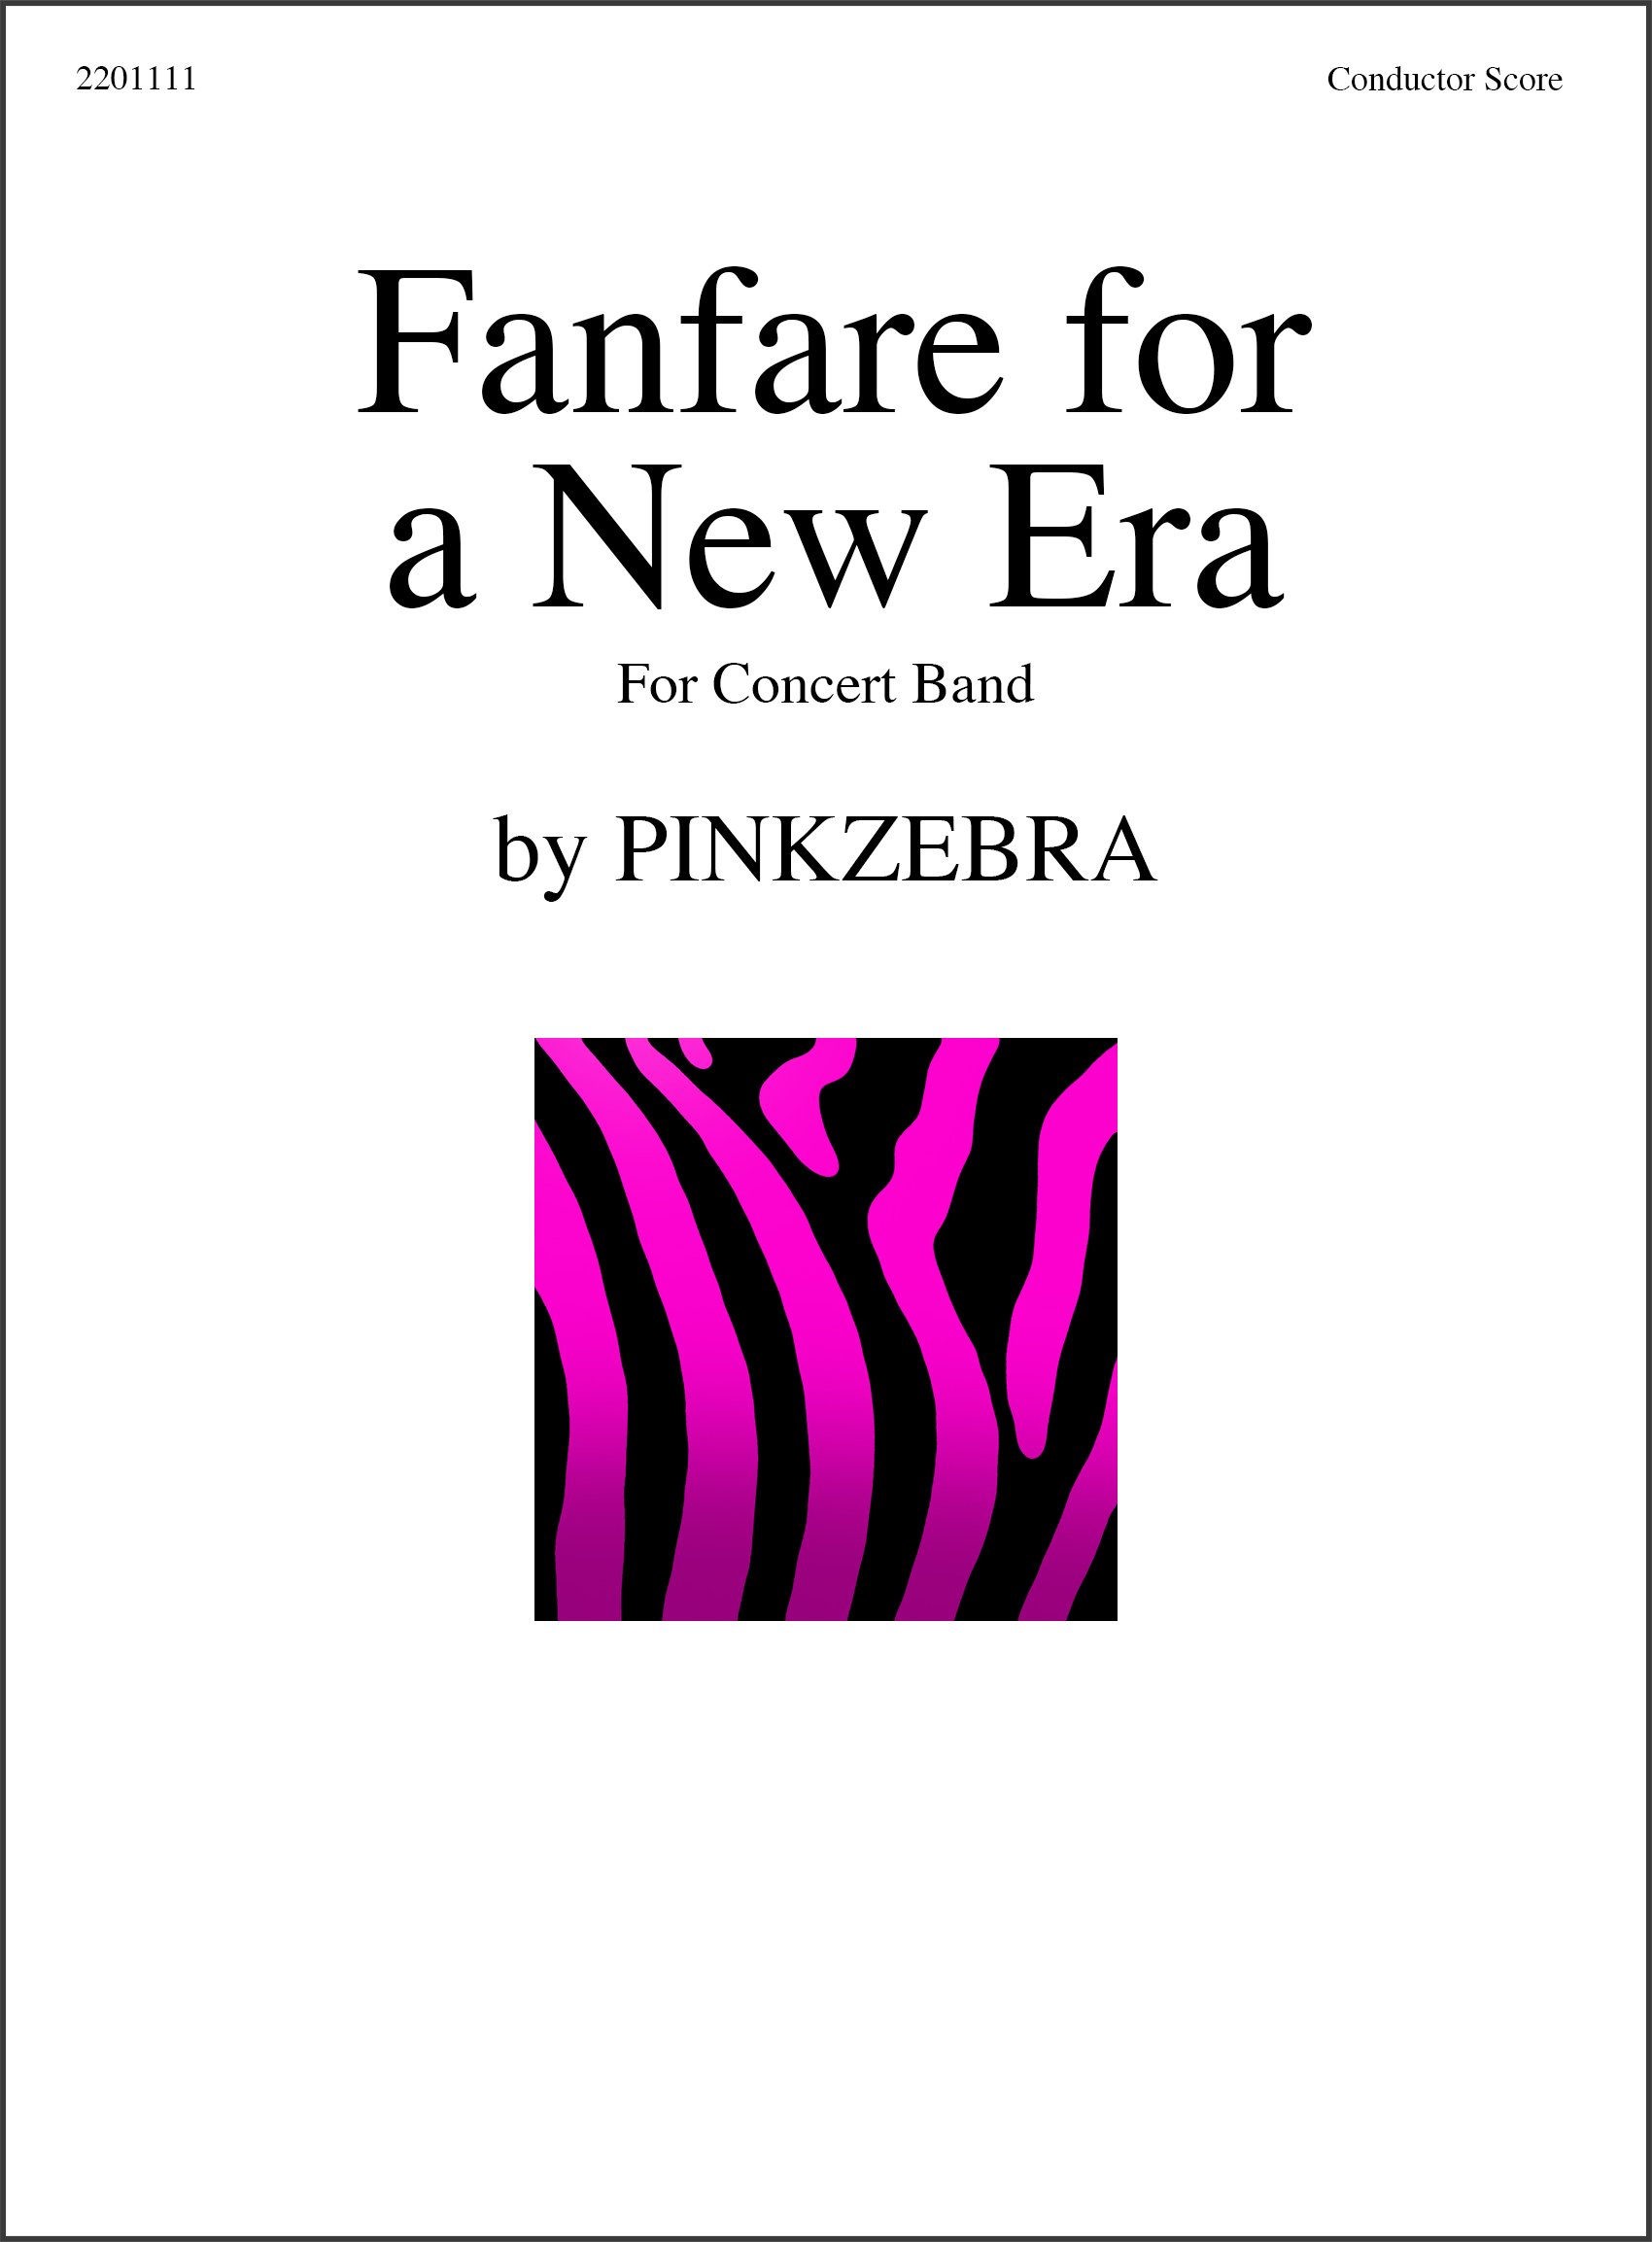 Fanfare for a New Era